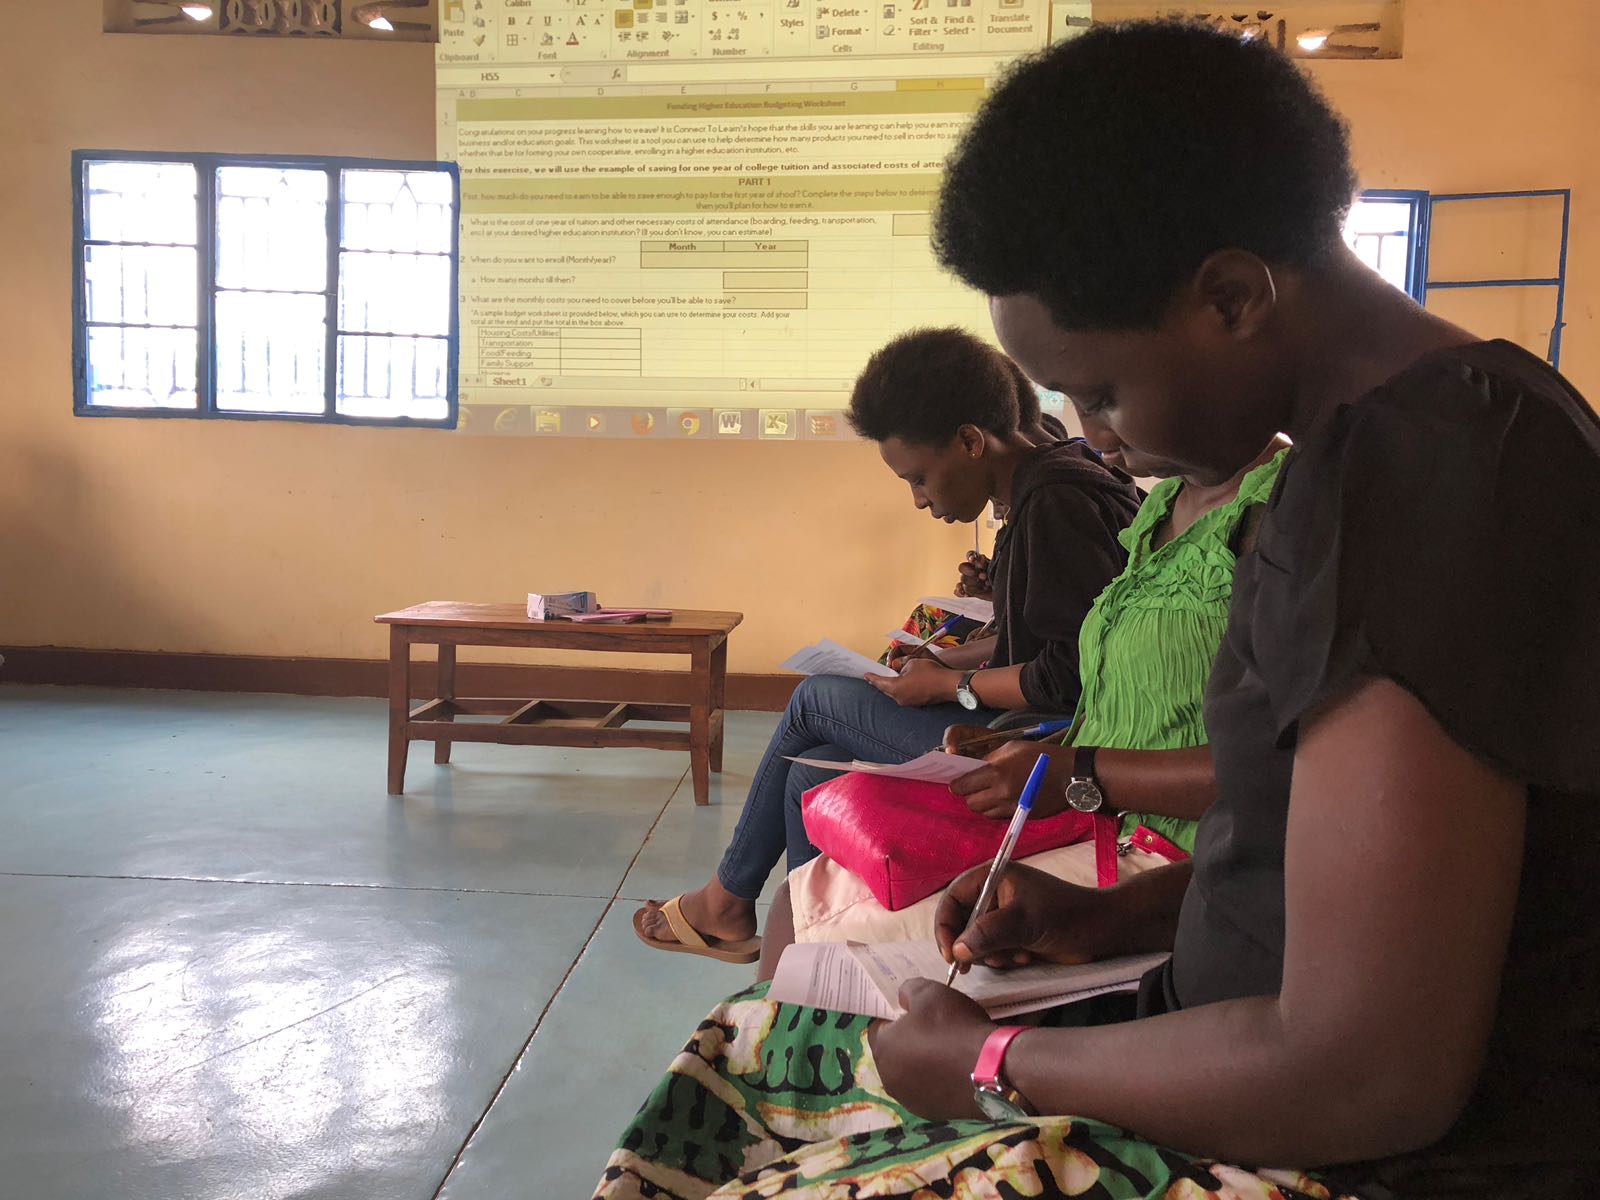 Women From Millennium Villages Project Becoming Businesswomen Through Connect To Learn Initiative